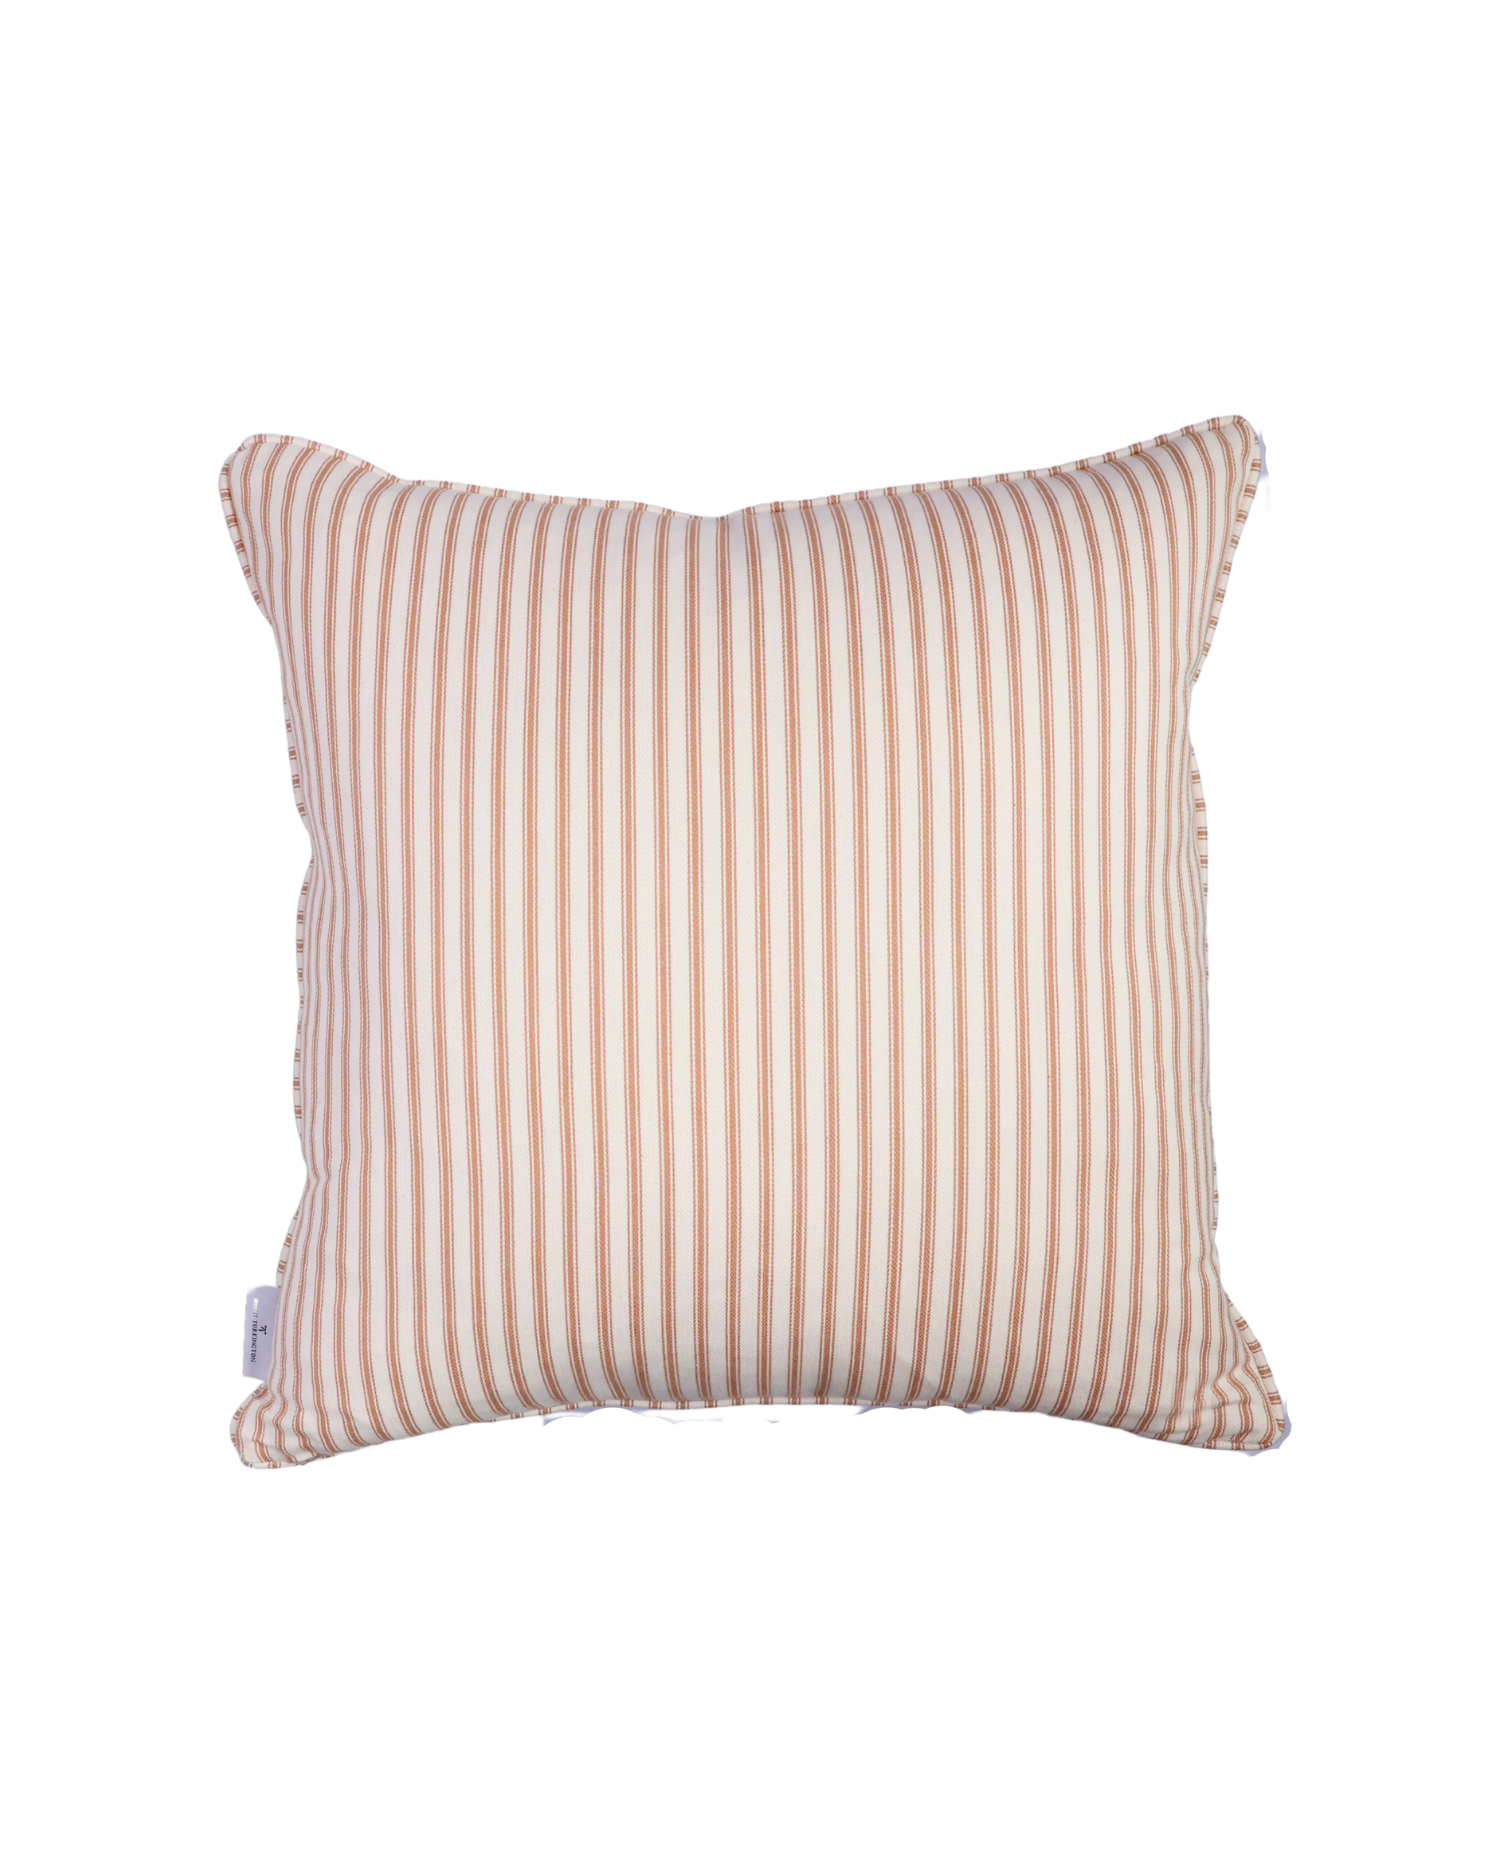 Gold and Natural stripe cushion